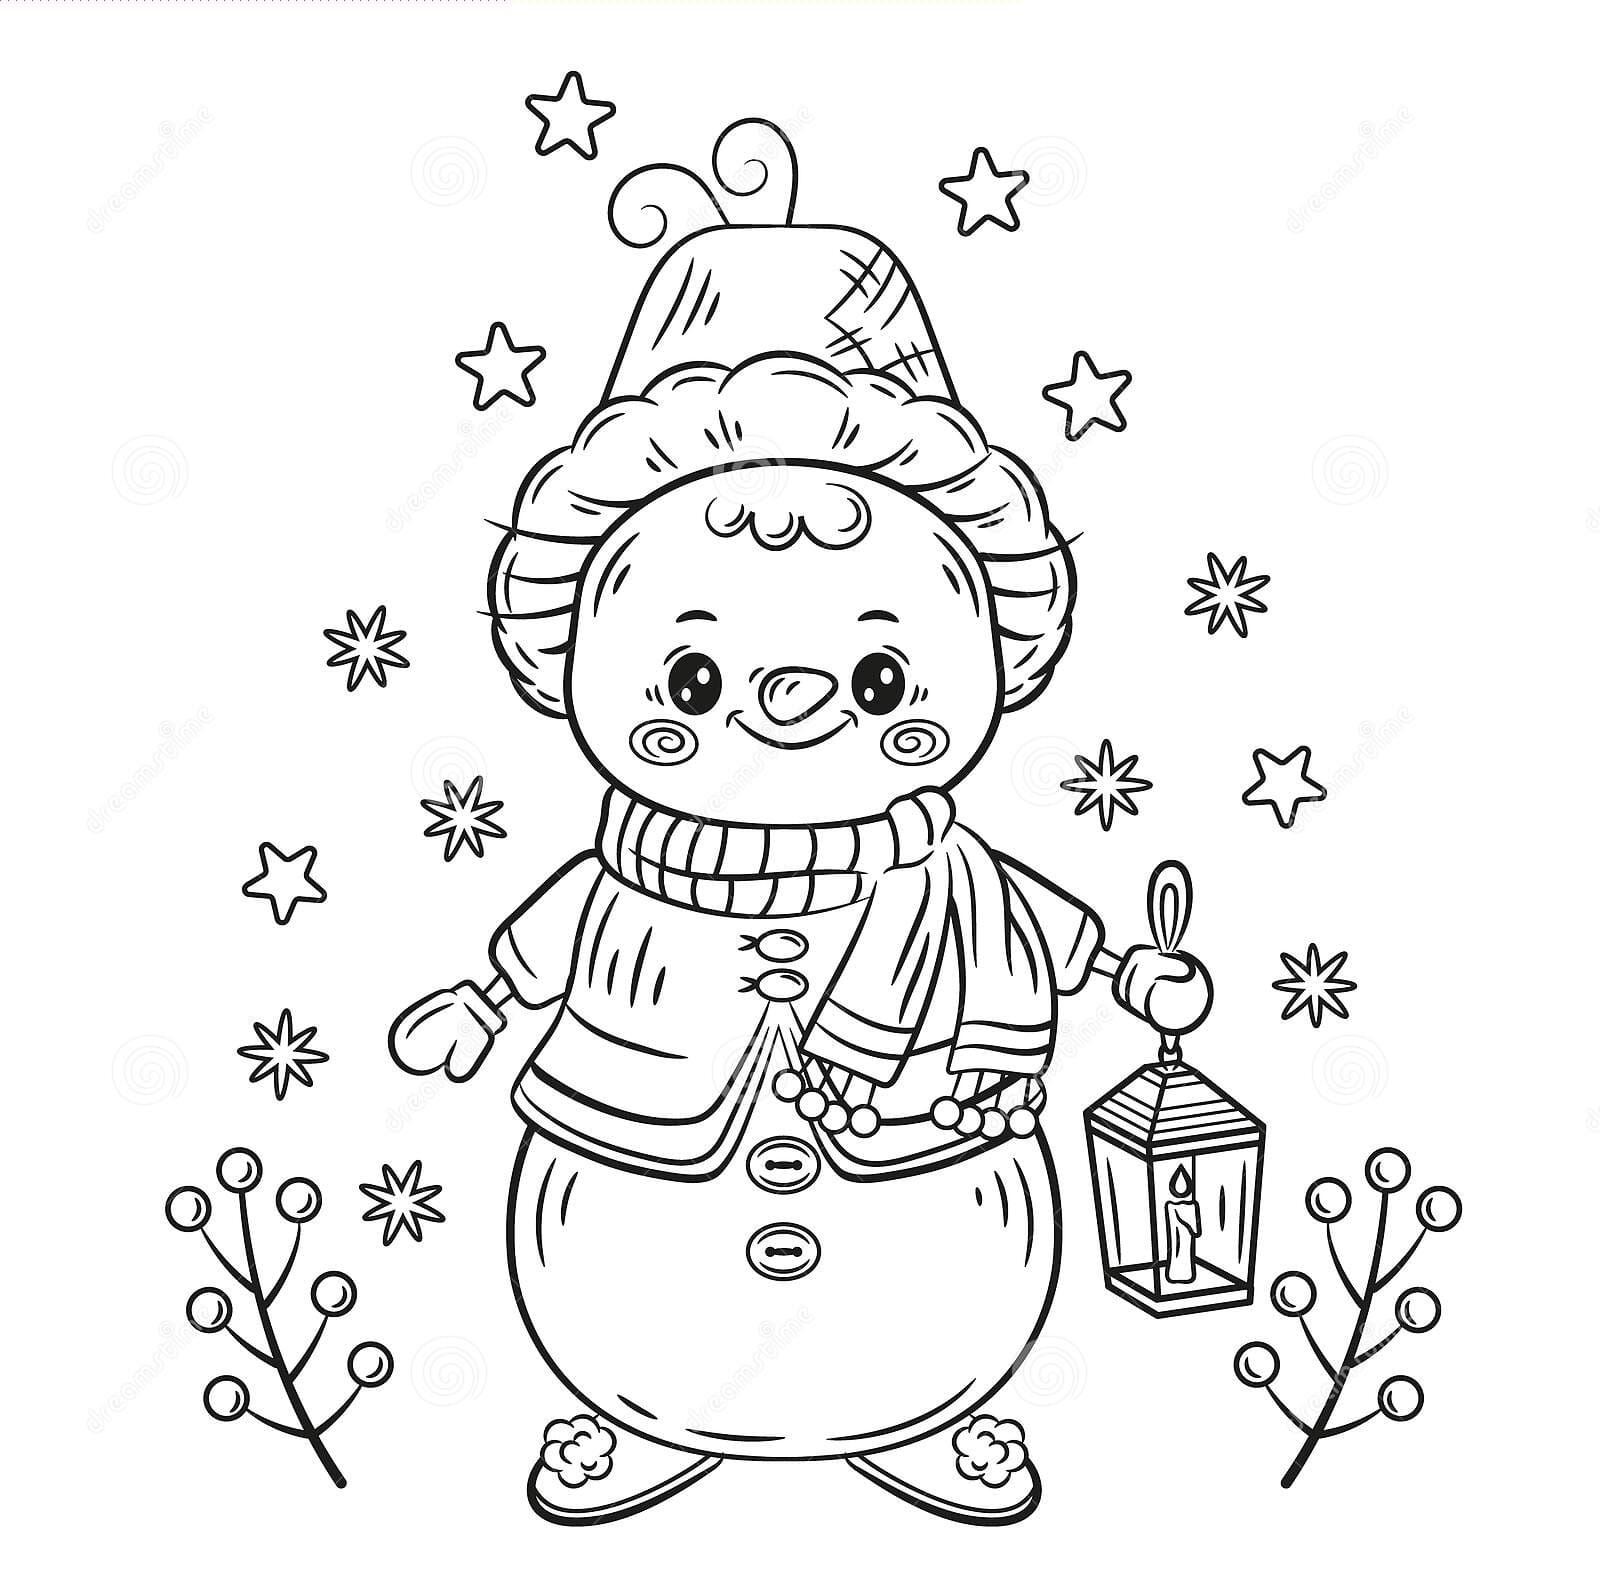 Cute Winter Snowman Christmas Children Image Coloring Page